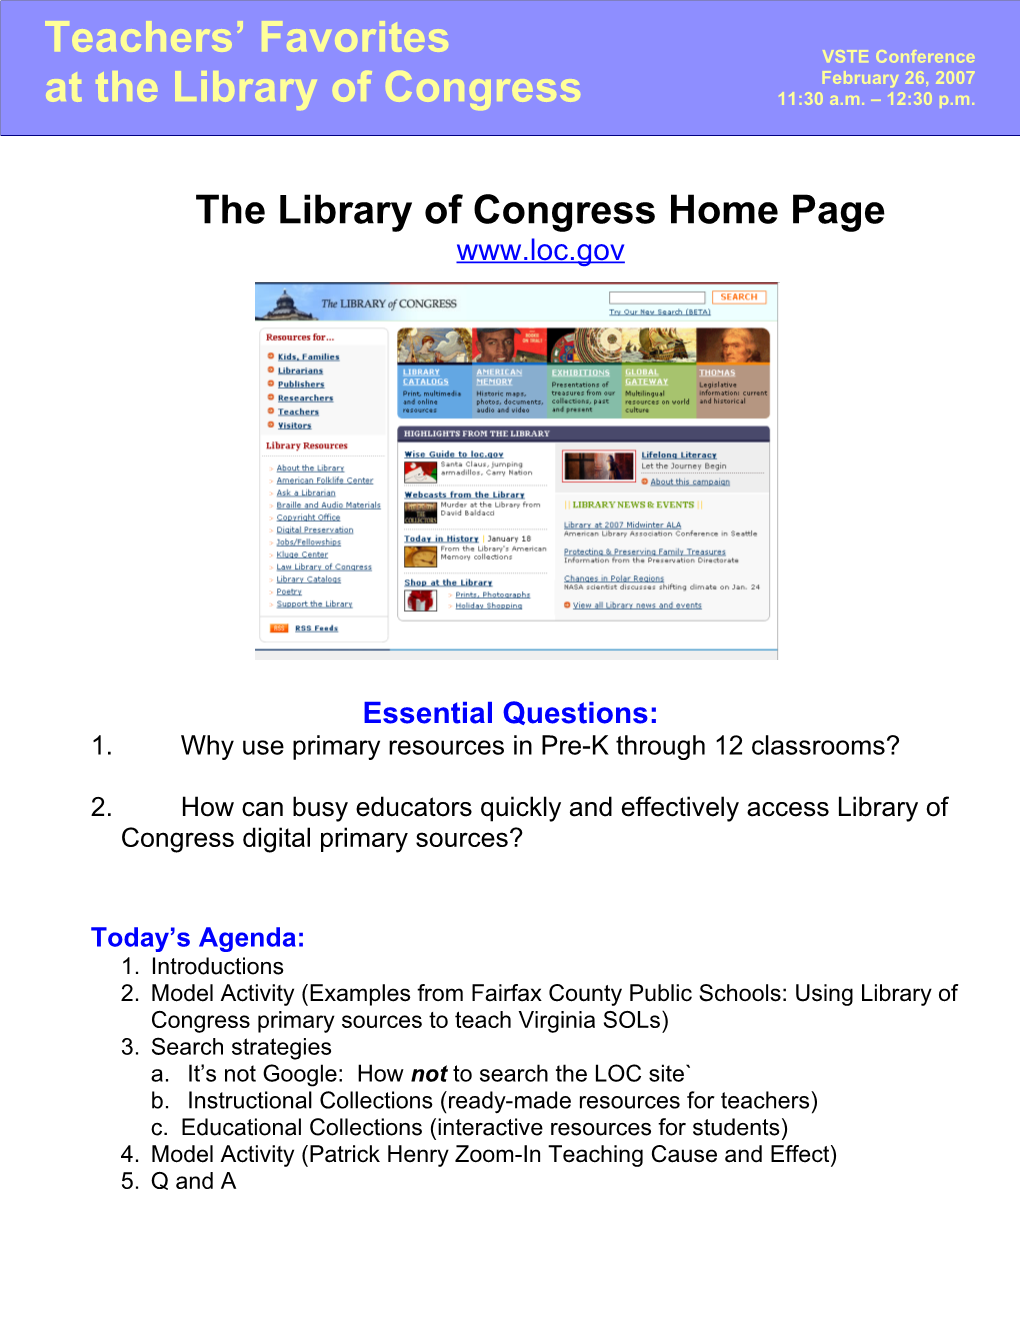 The Library of Congress Home Page